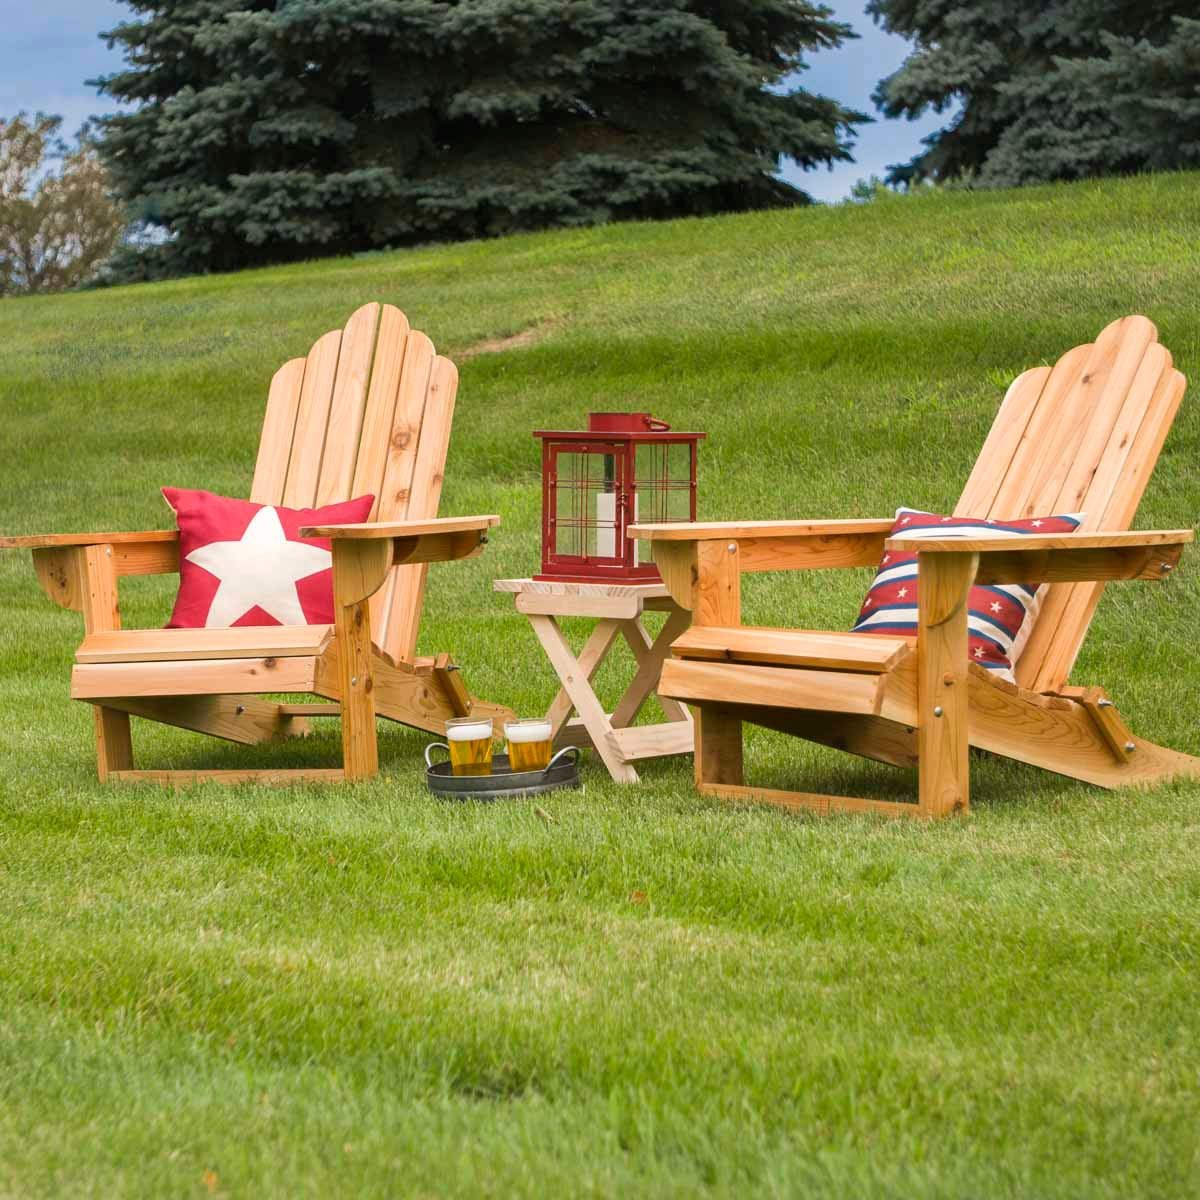 Saturday Morning Workshop: How To Build A Folding Adirondack Chair